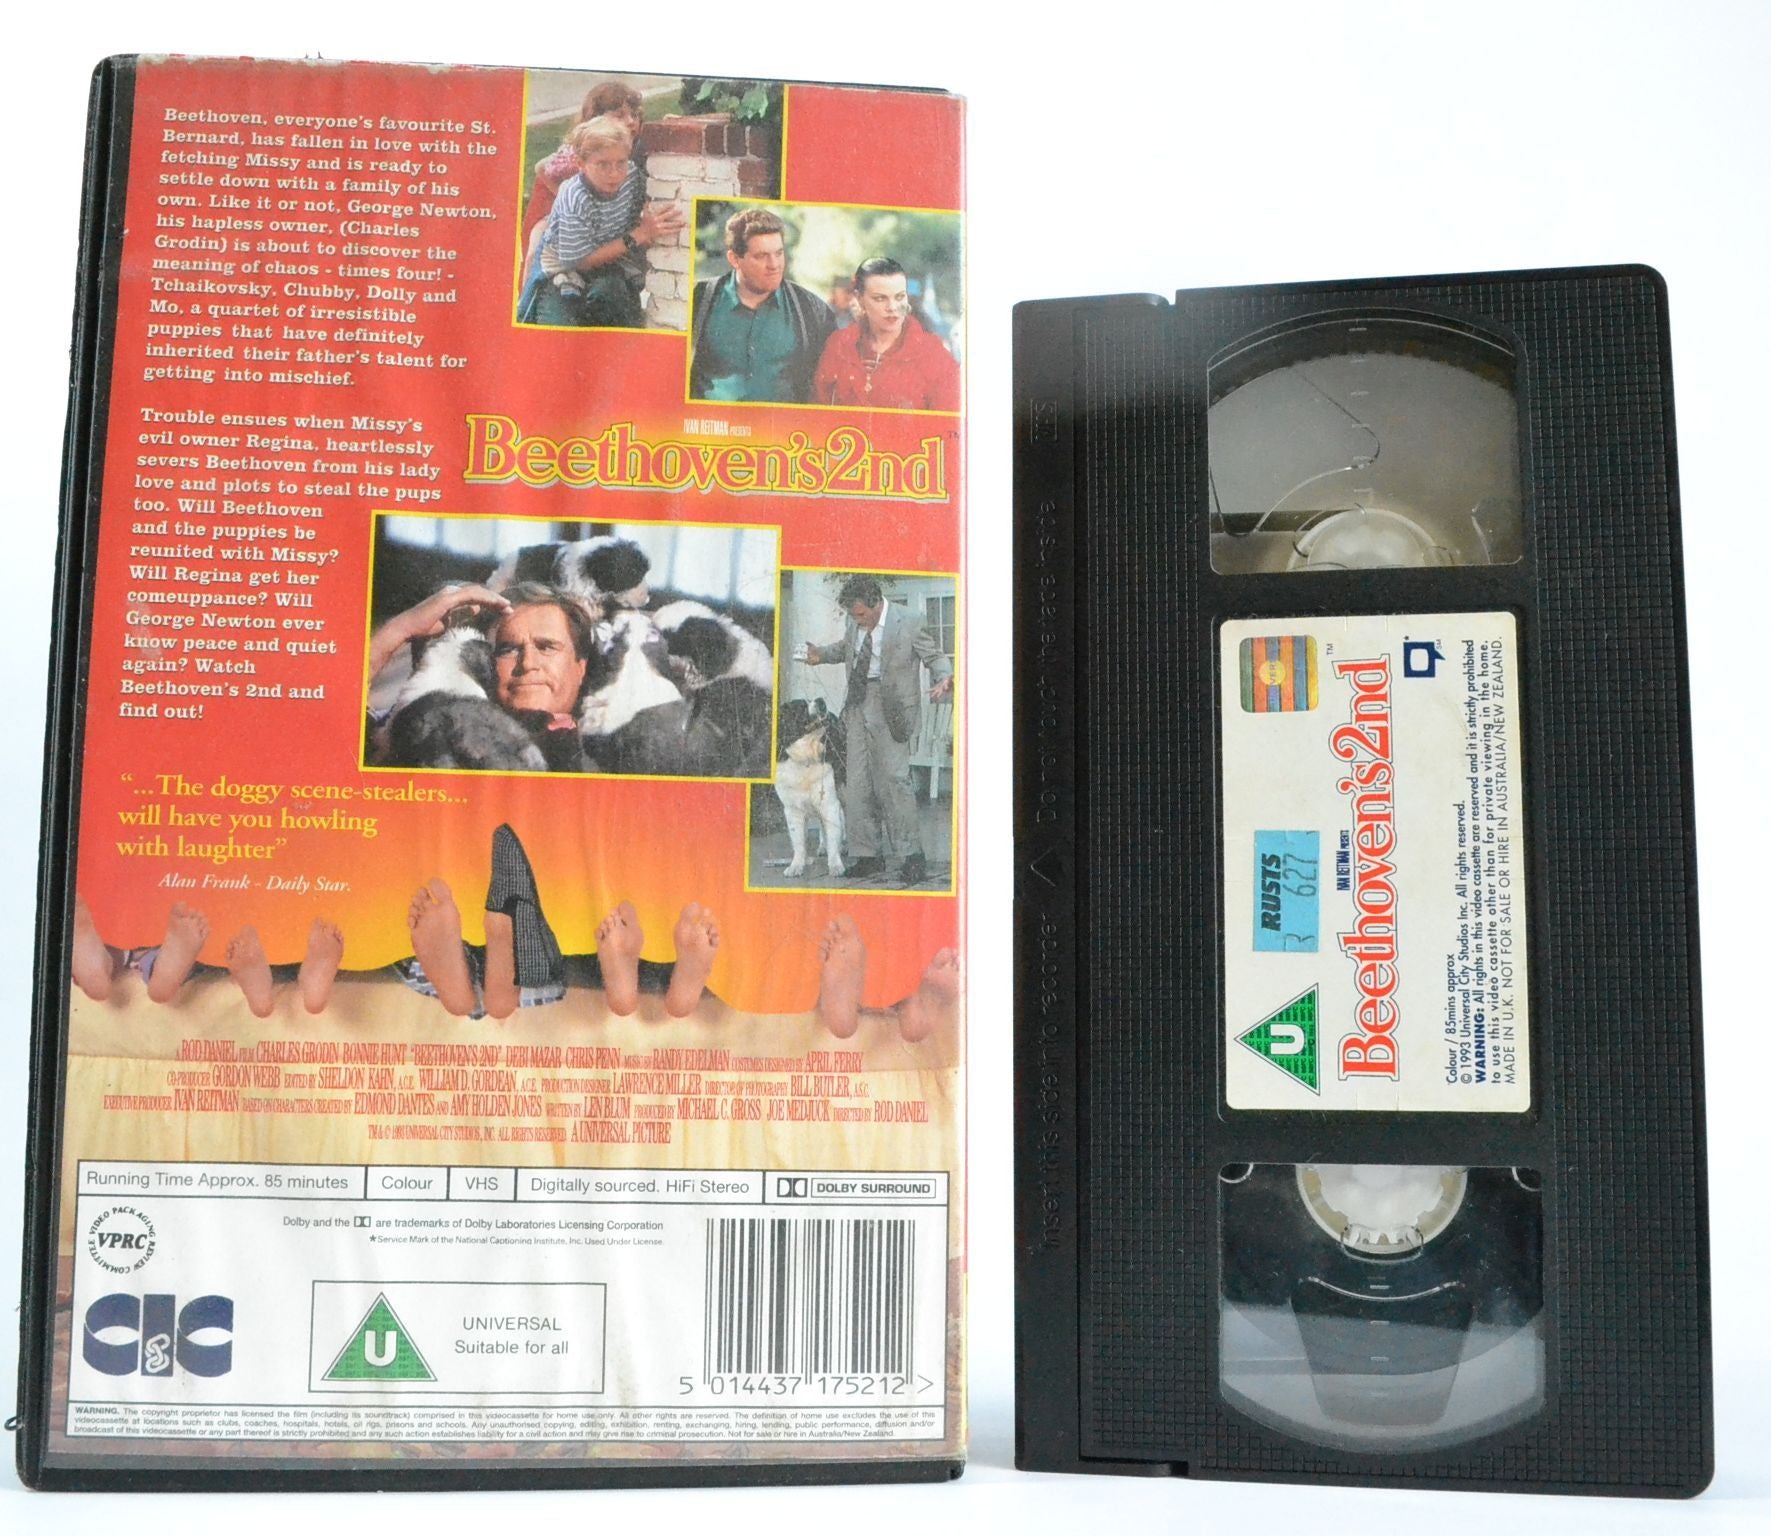 Beethoven’s 2nd: Charles Grodin- Large Box - Ex-Rental - Any Age Comedy - VHS-